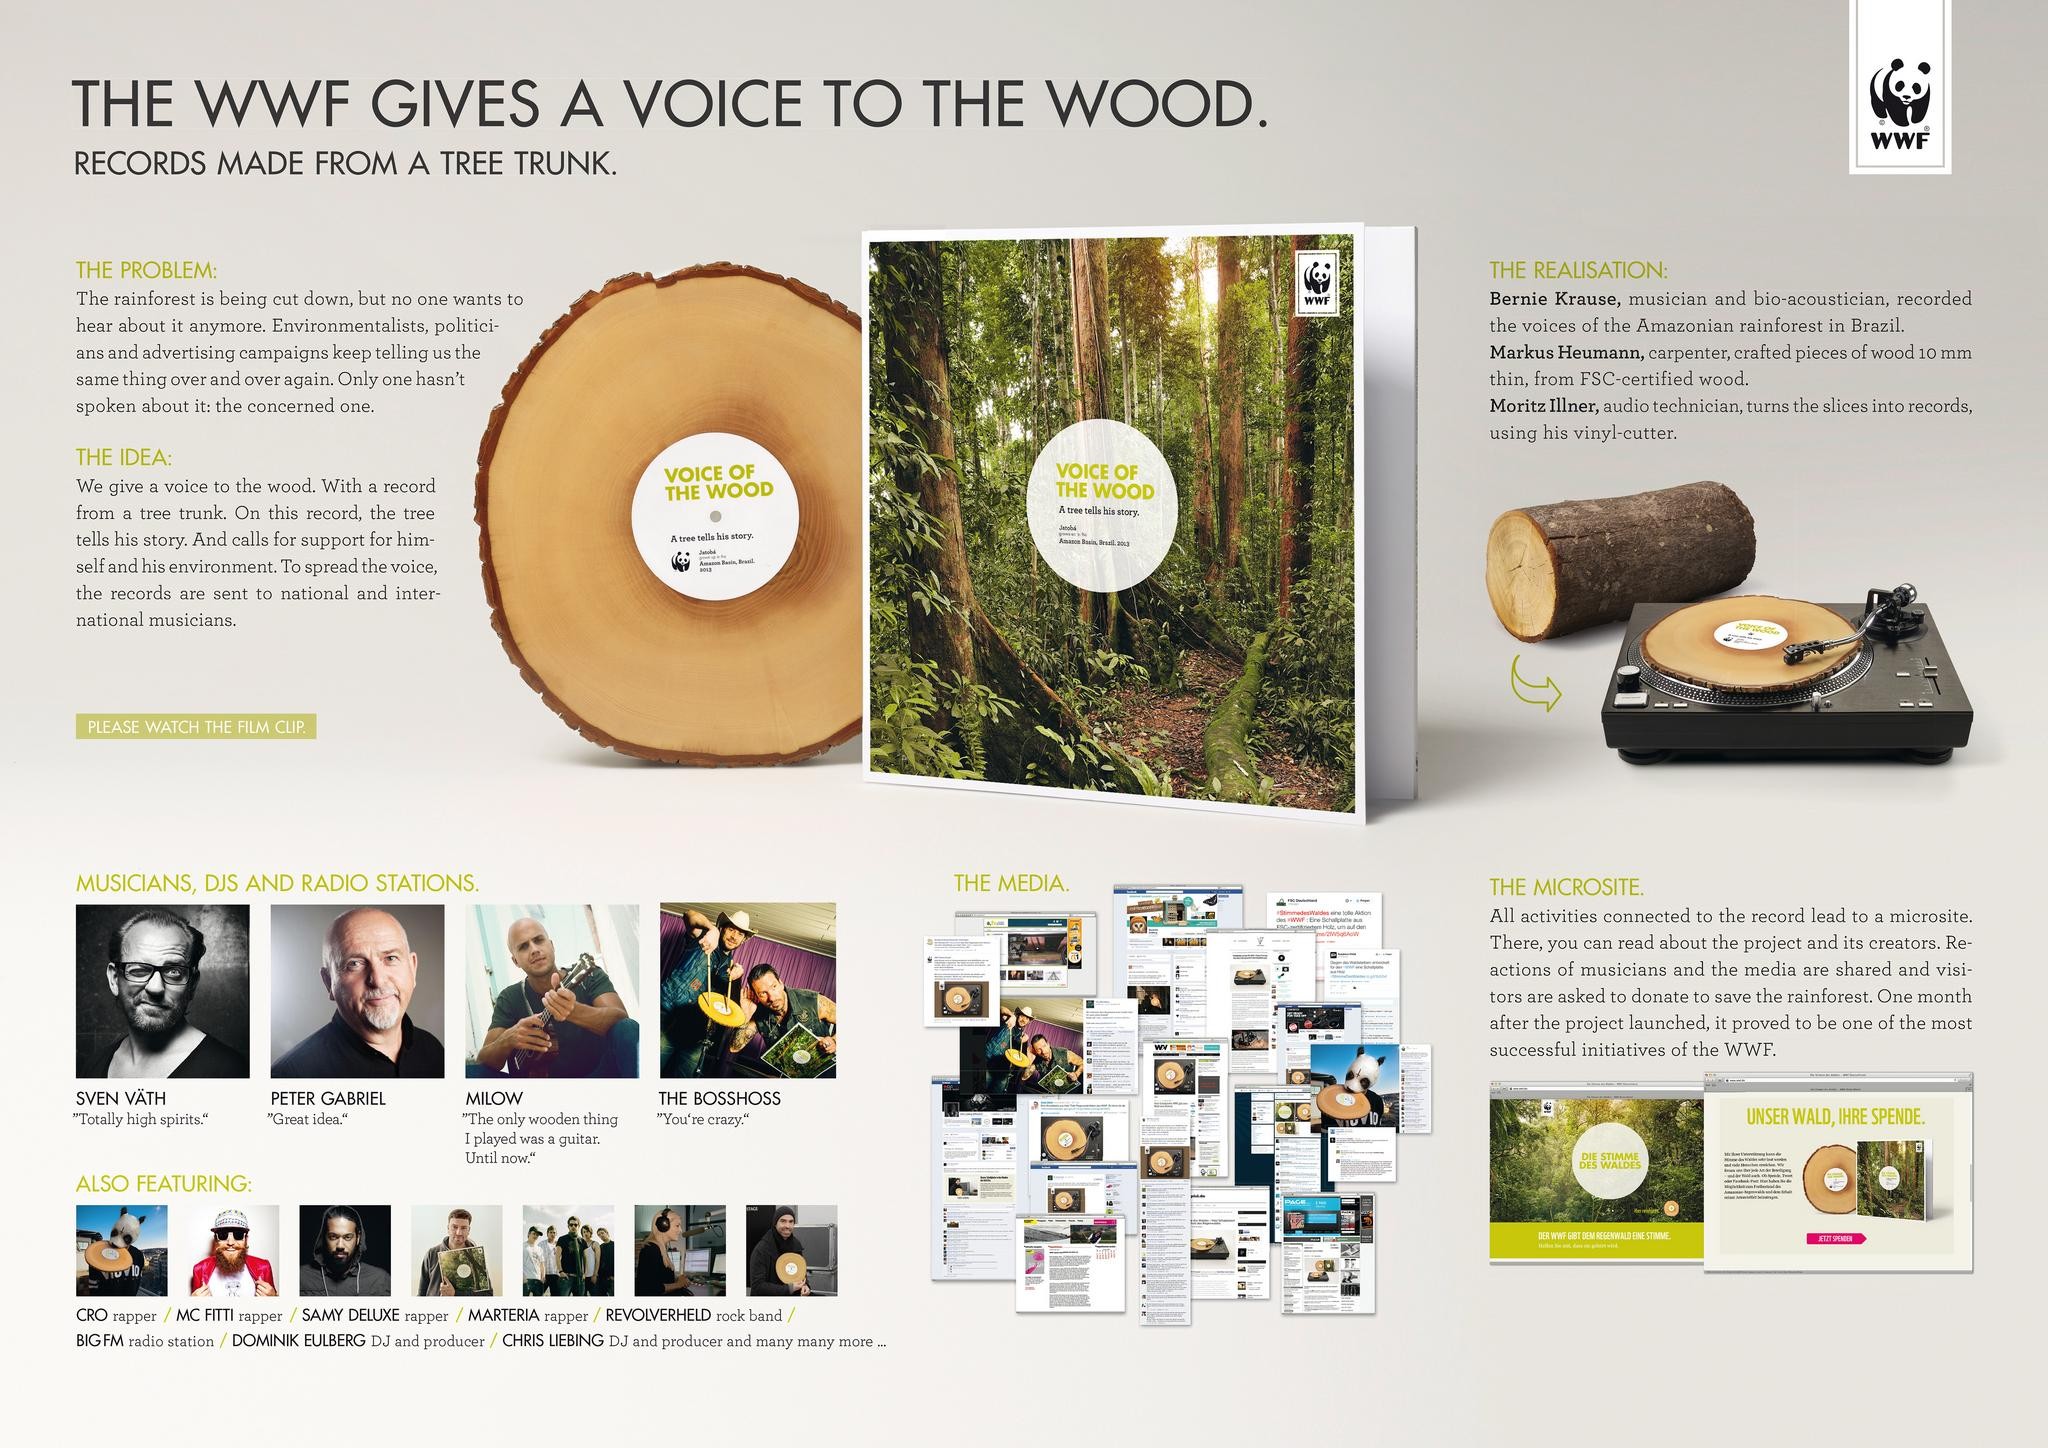 VOICE OF THE WOOD